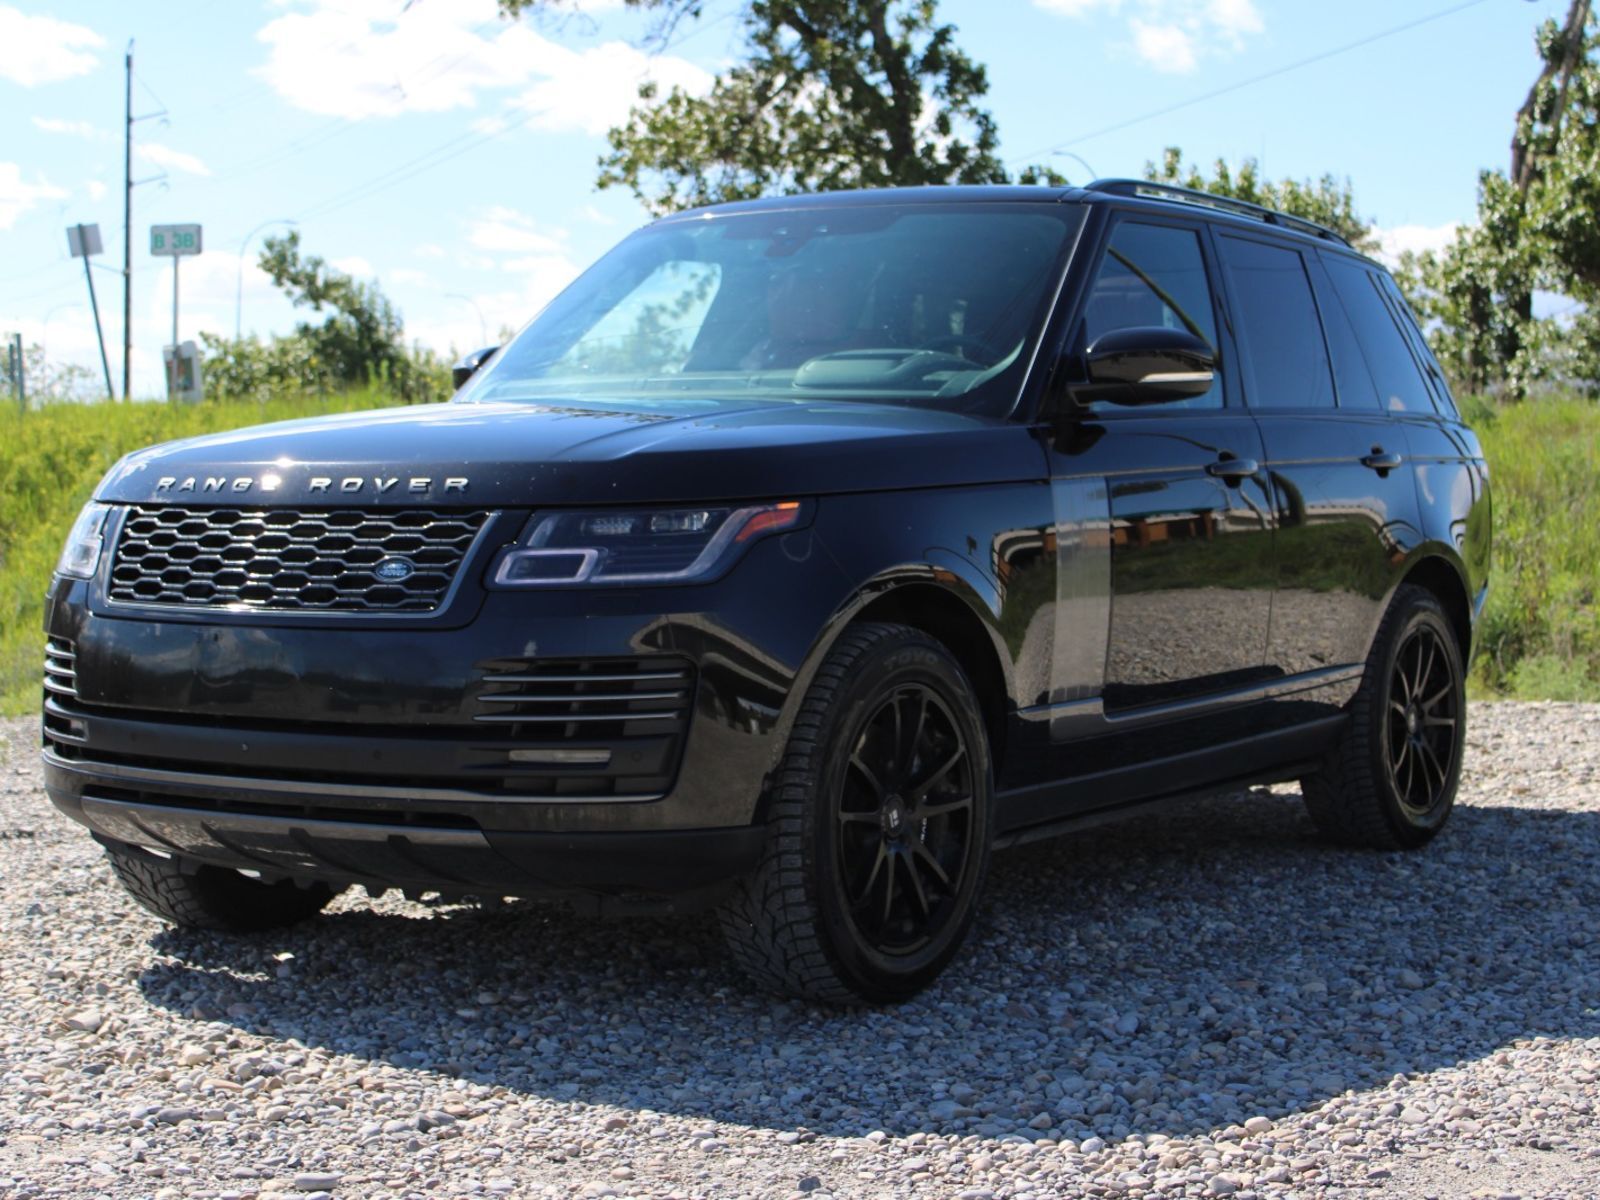 2022 Land Rover Range Rover $185K MSRP - DEPLOYABLE SIDESTEPS/TWO SETS OF WHEE